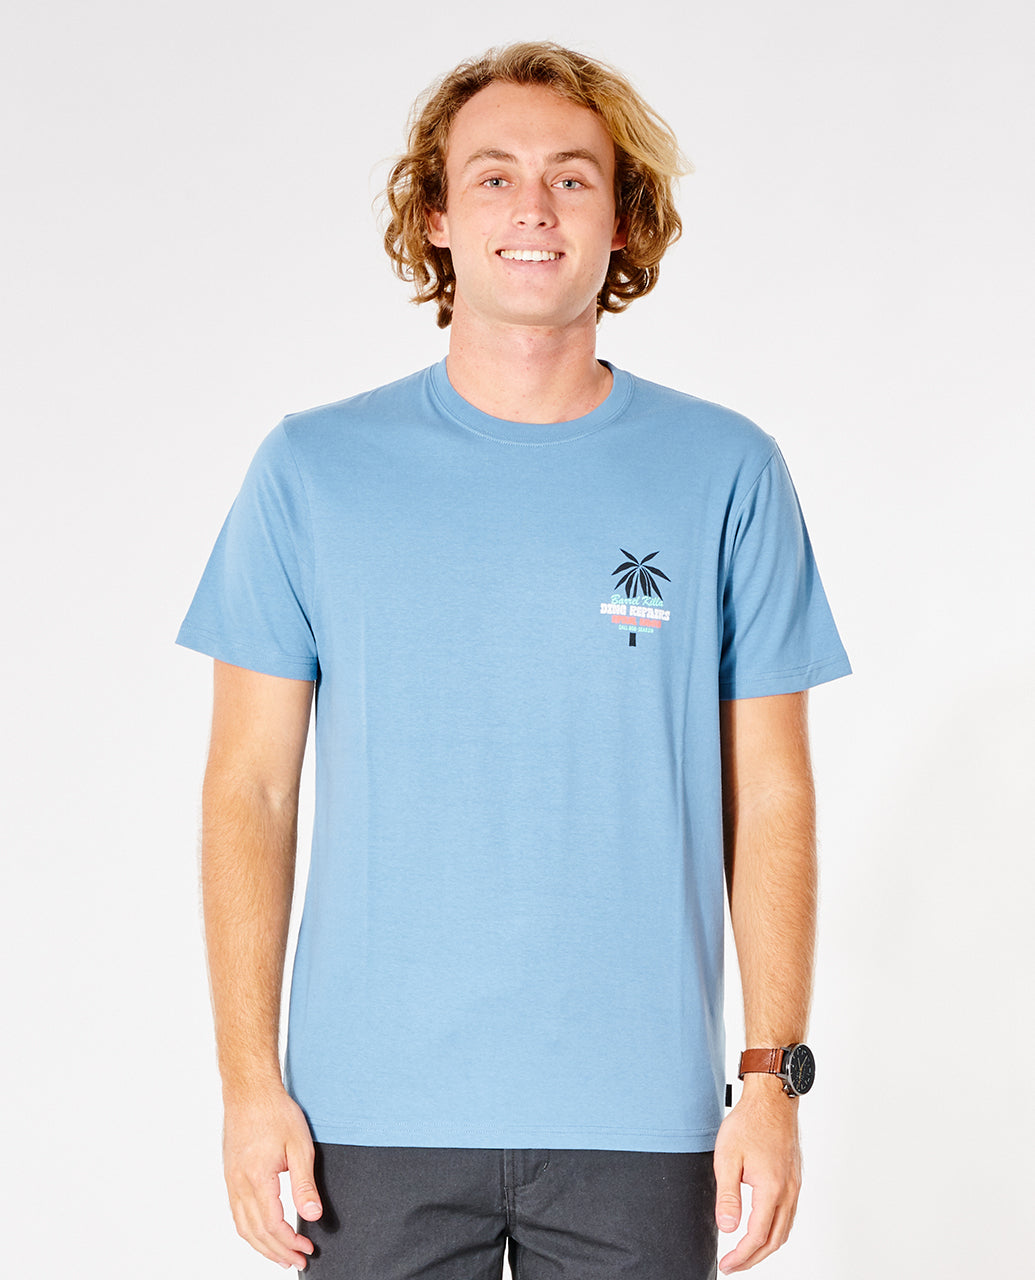 Barrel Killa Palm Tee - Surf Clothing for mens – Rip Curl Indonesia